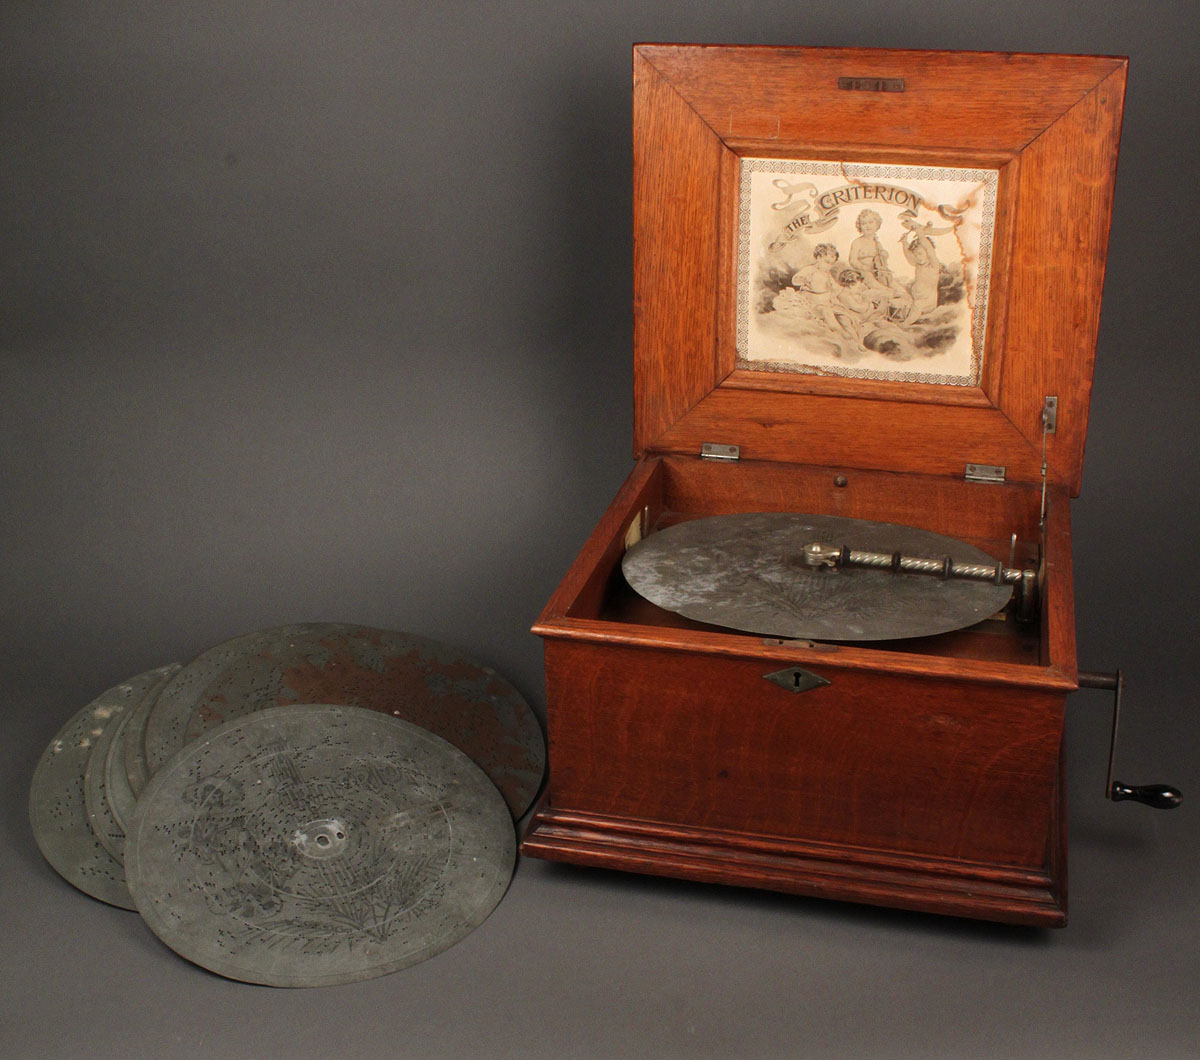 Lot 489: The Criterion Music Box w/ discs